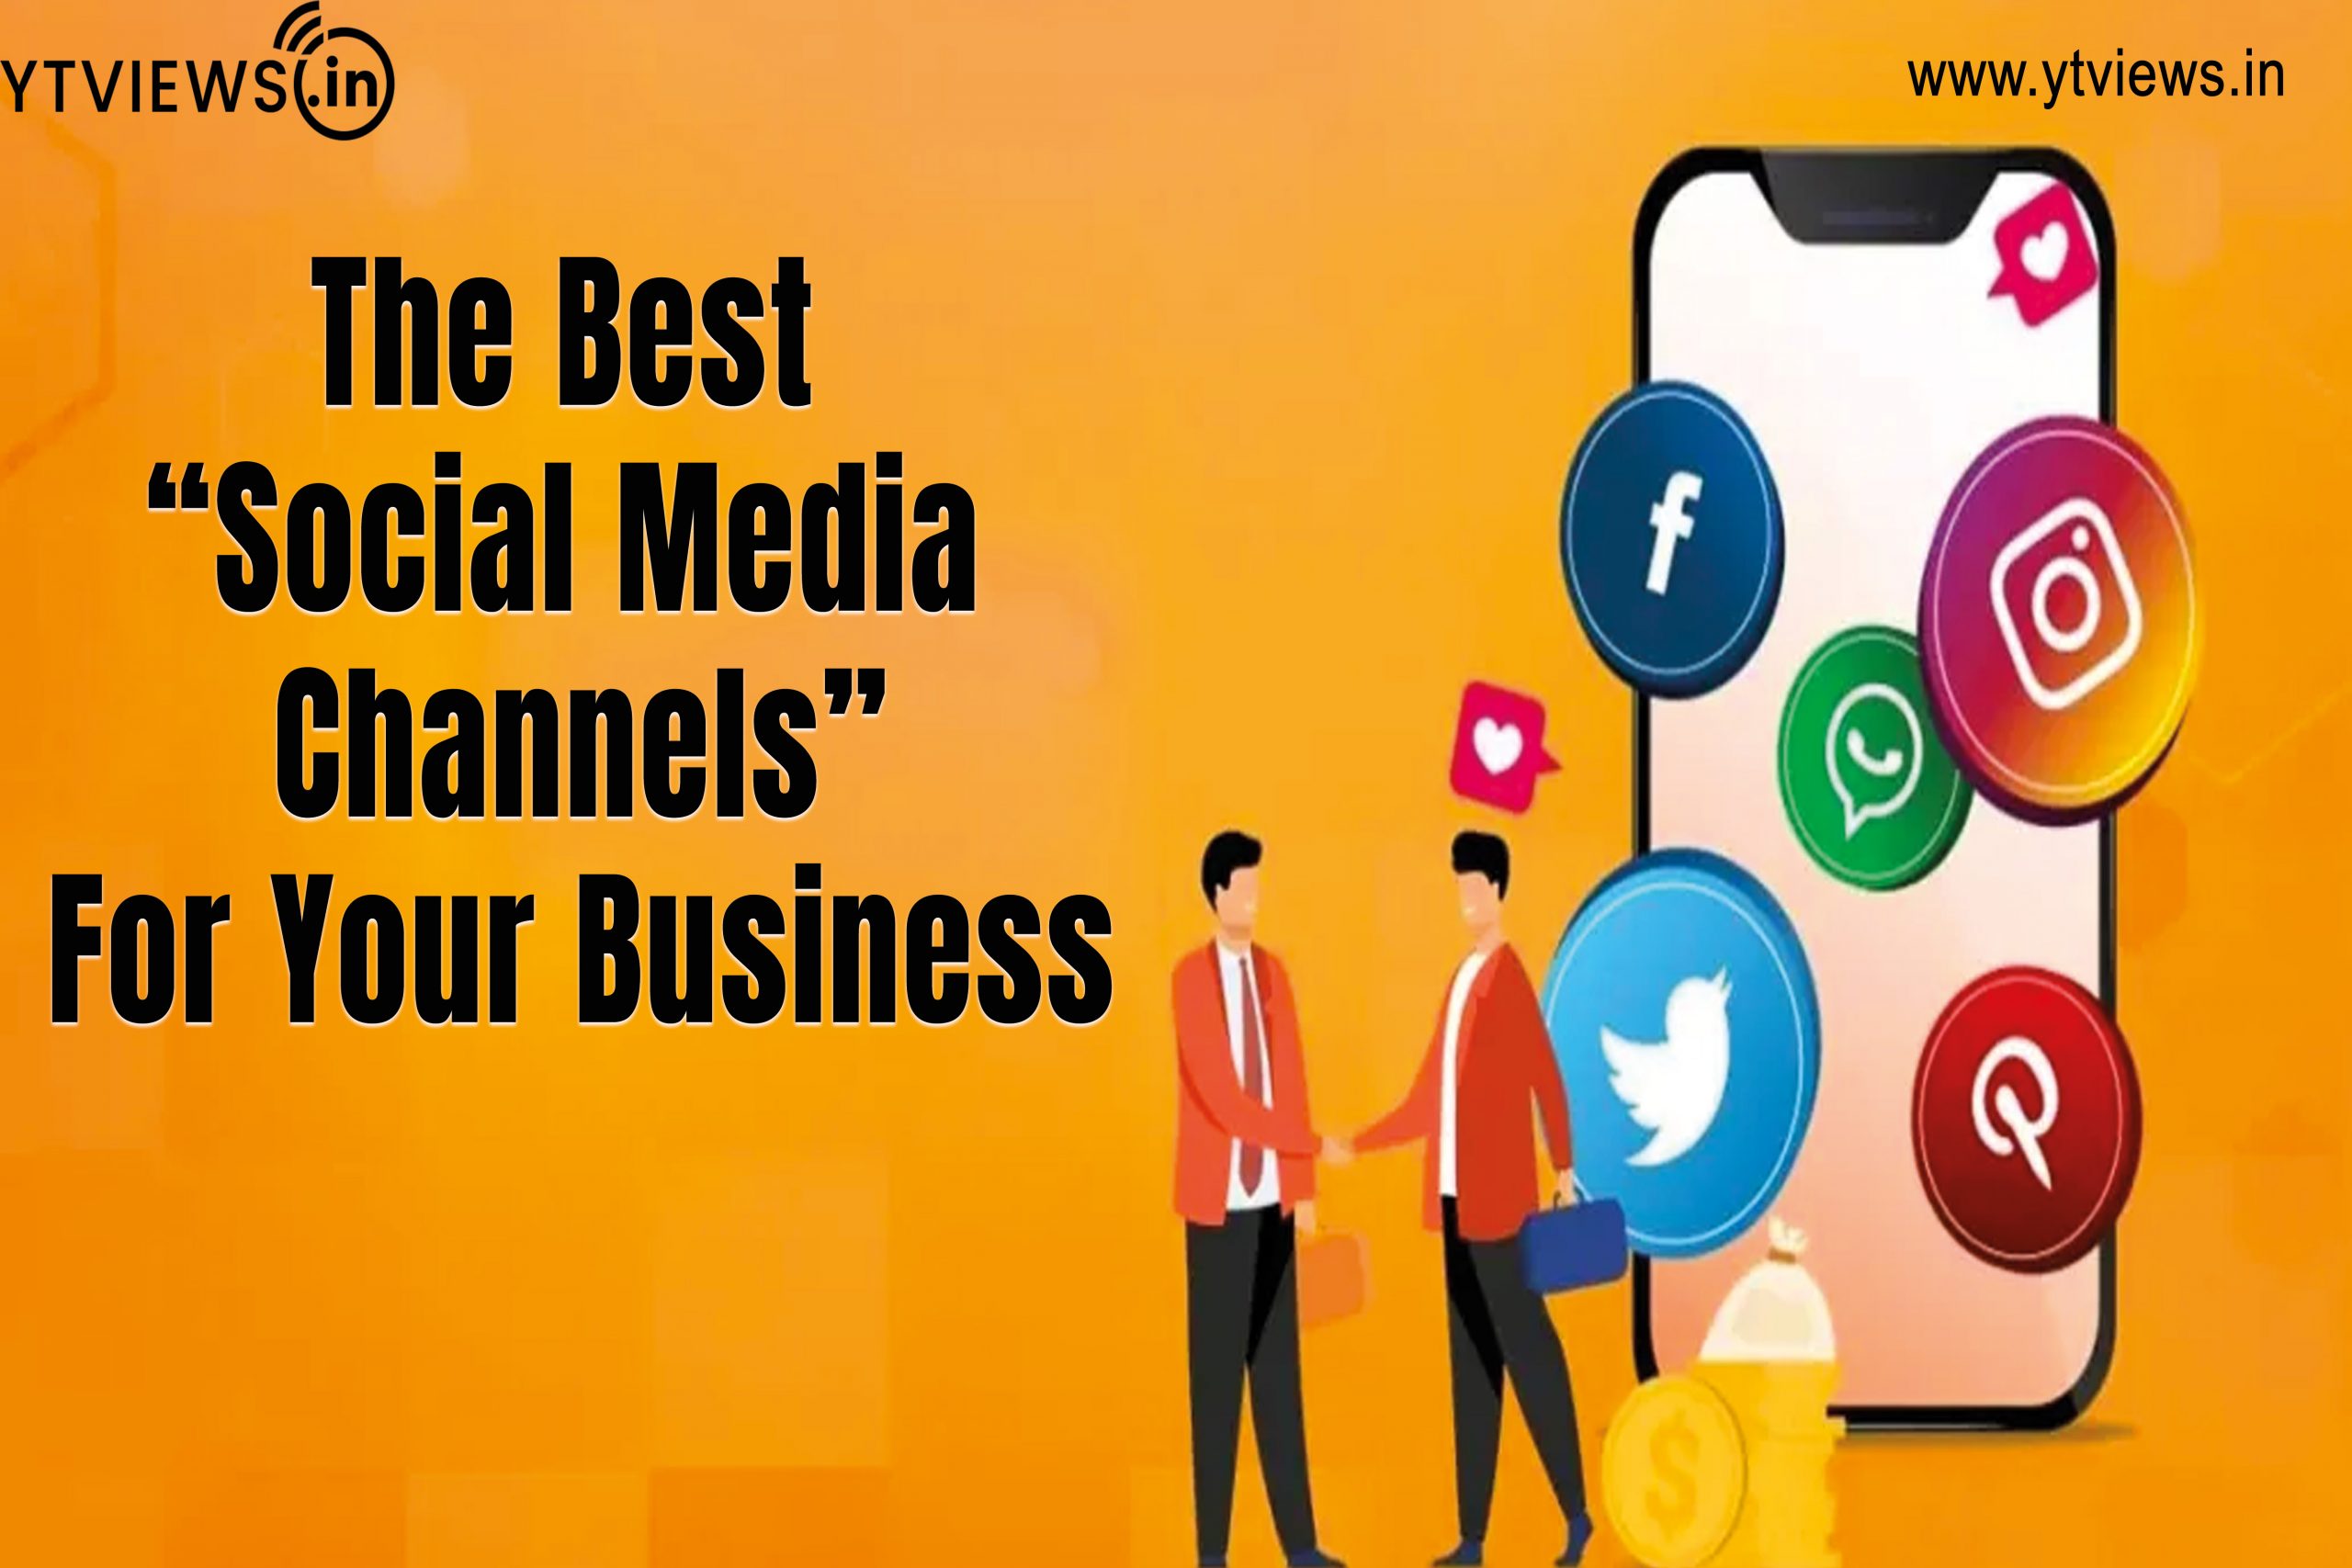 The best social media channels for your business